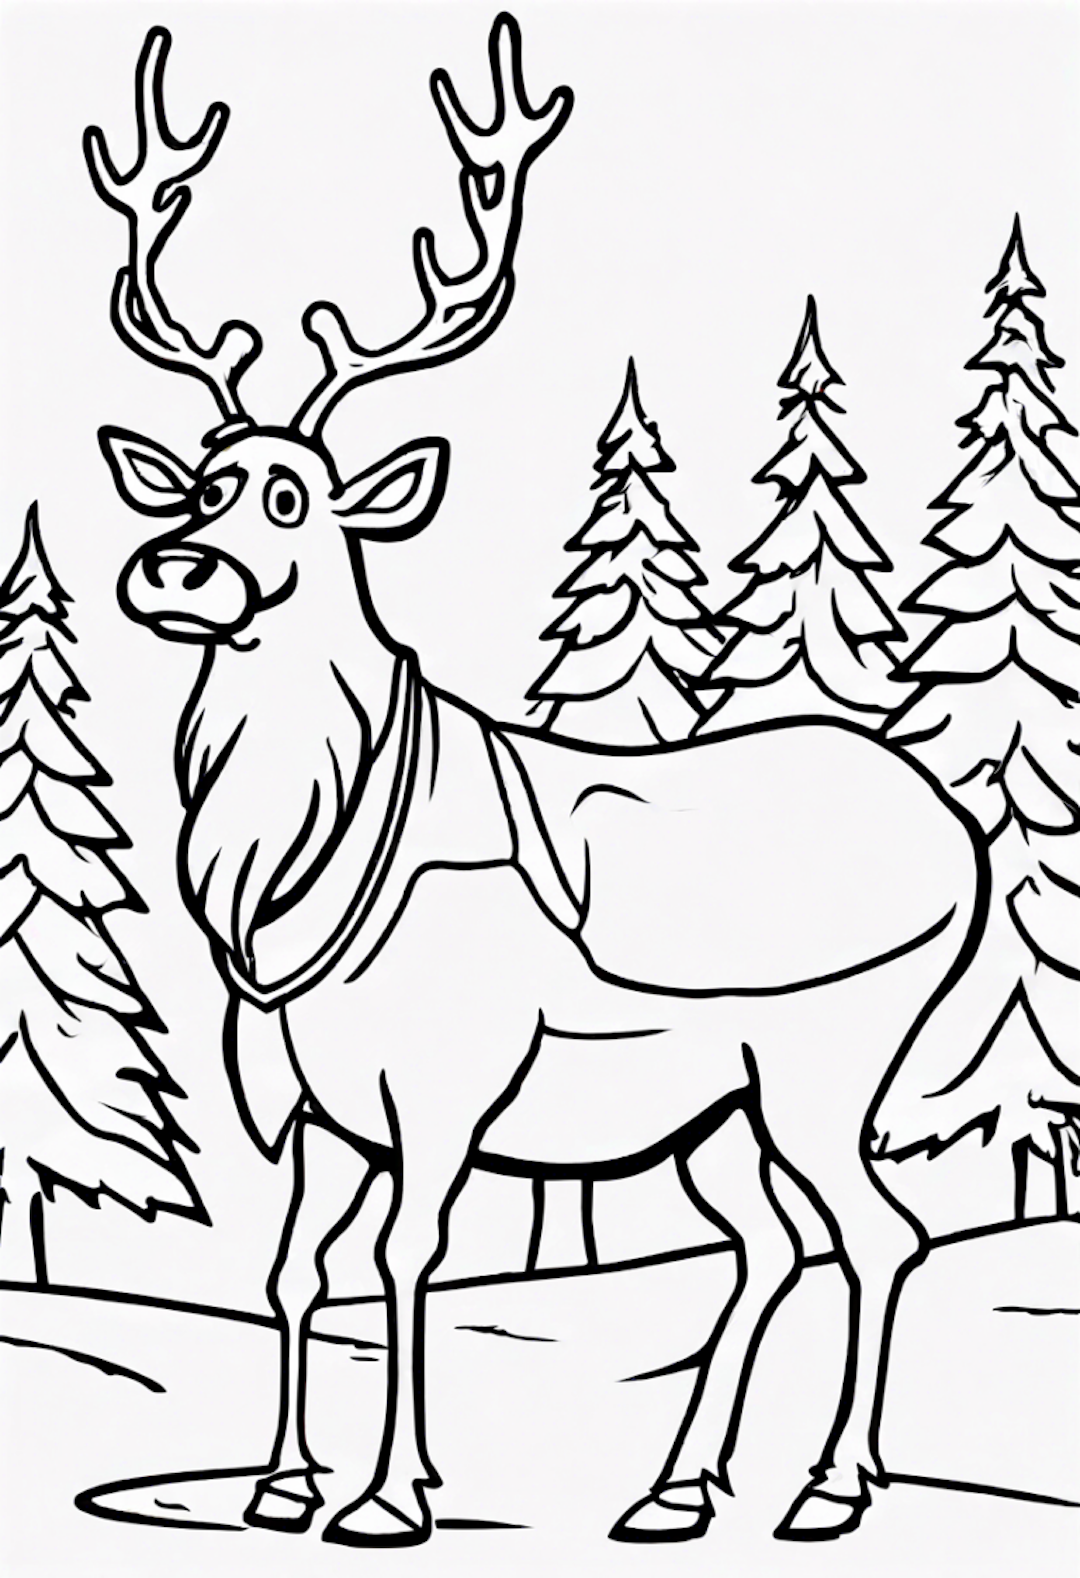 Sven the Reindeer in the Winter Forest coloring pages